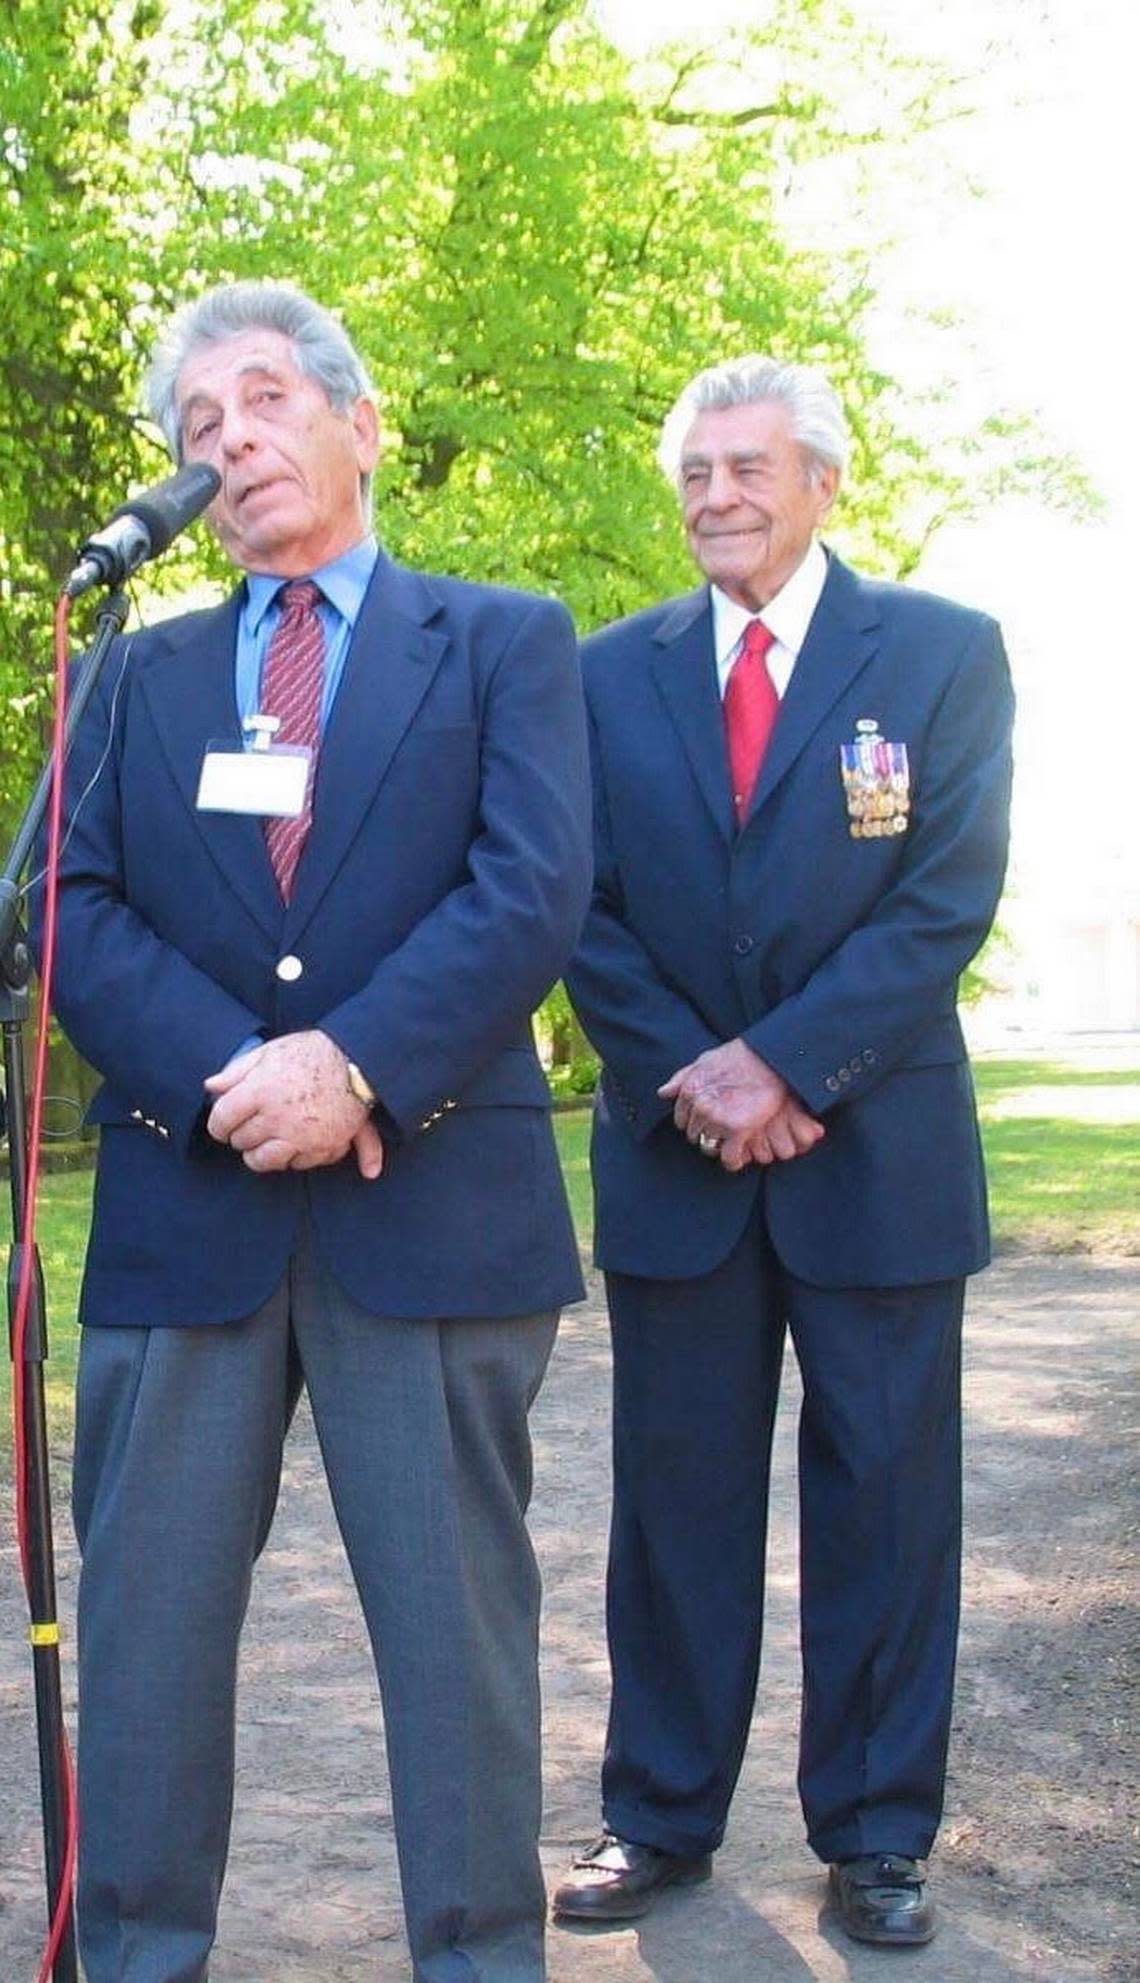 George Salton, left, and James Megellas attend a memorial service in 2007 at the Wöbbelin concentration camp, marking 62 years since its liberation. Megellas, a decorated member of the 82nd U.S. Army Airborne Division, was among the liberators.